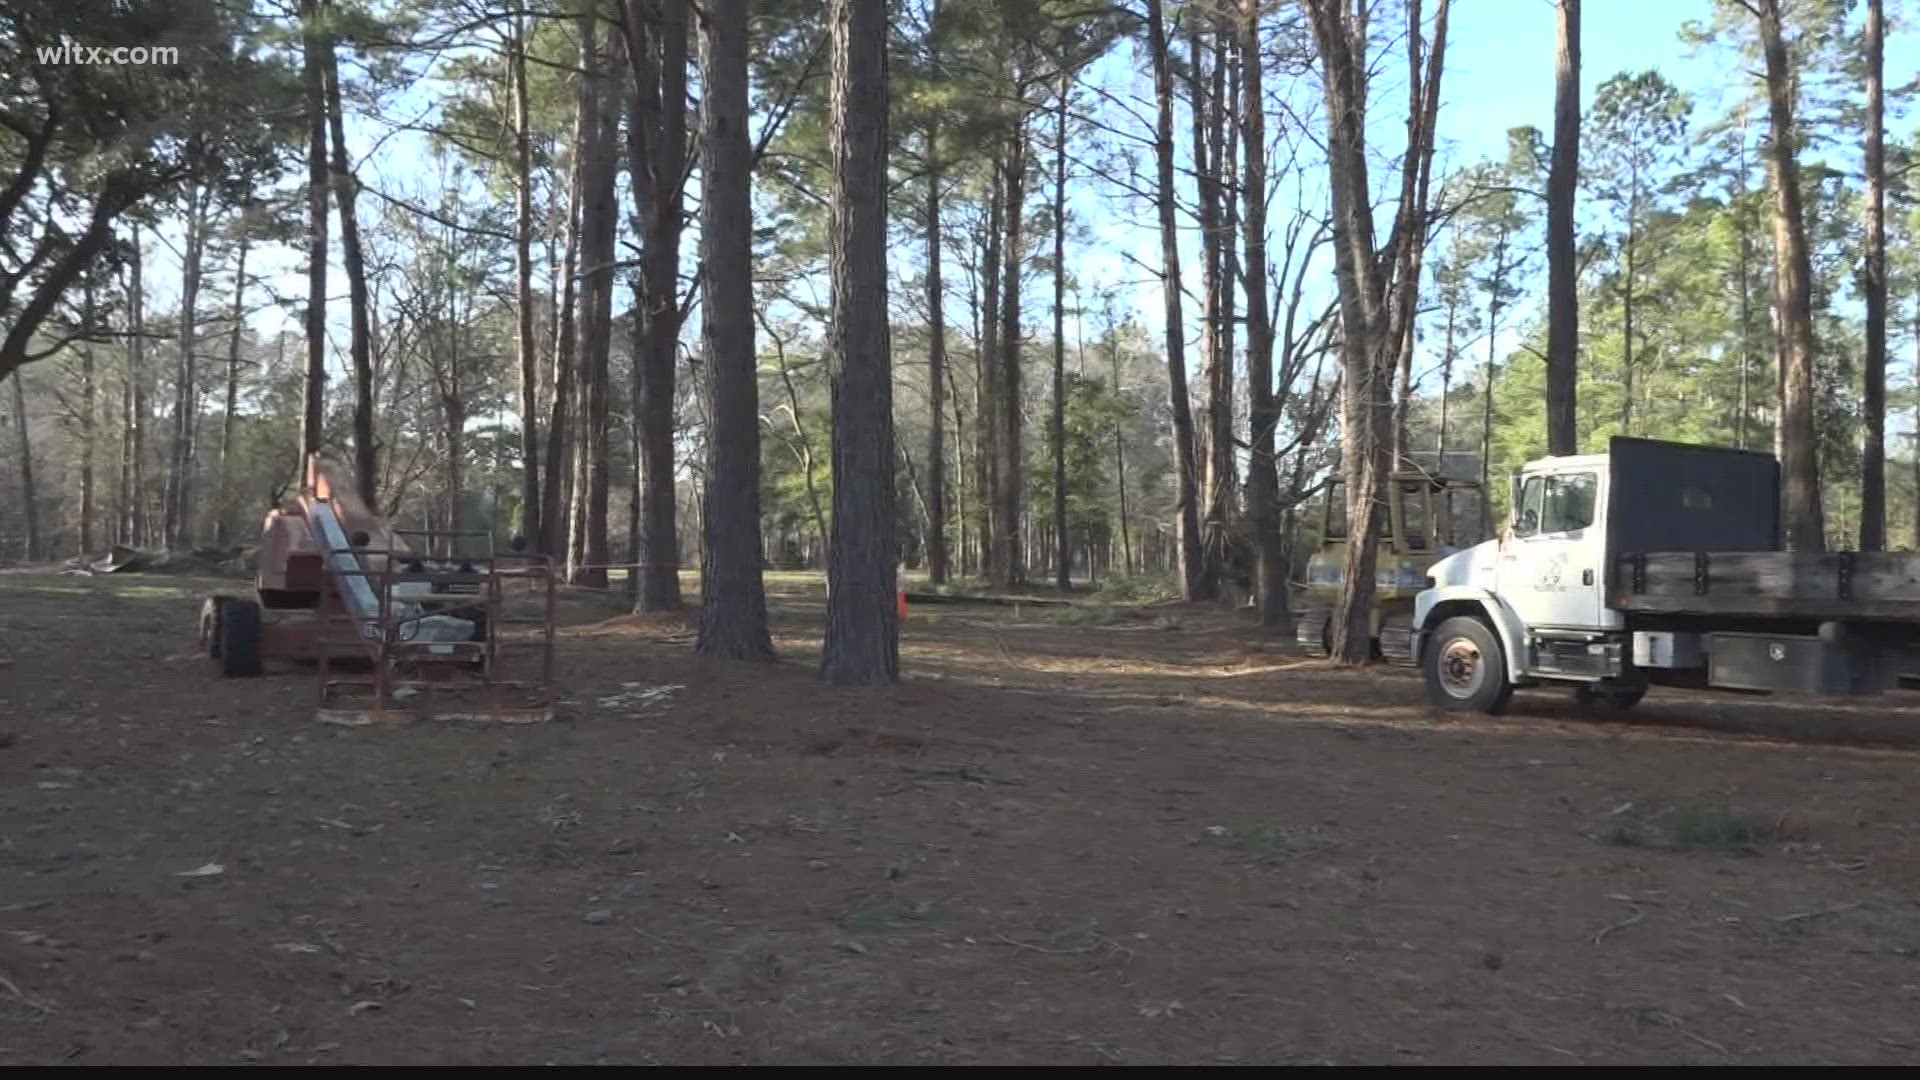 A new campsite is in the works, the owners of the Lone Star BBQ say its a great place.